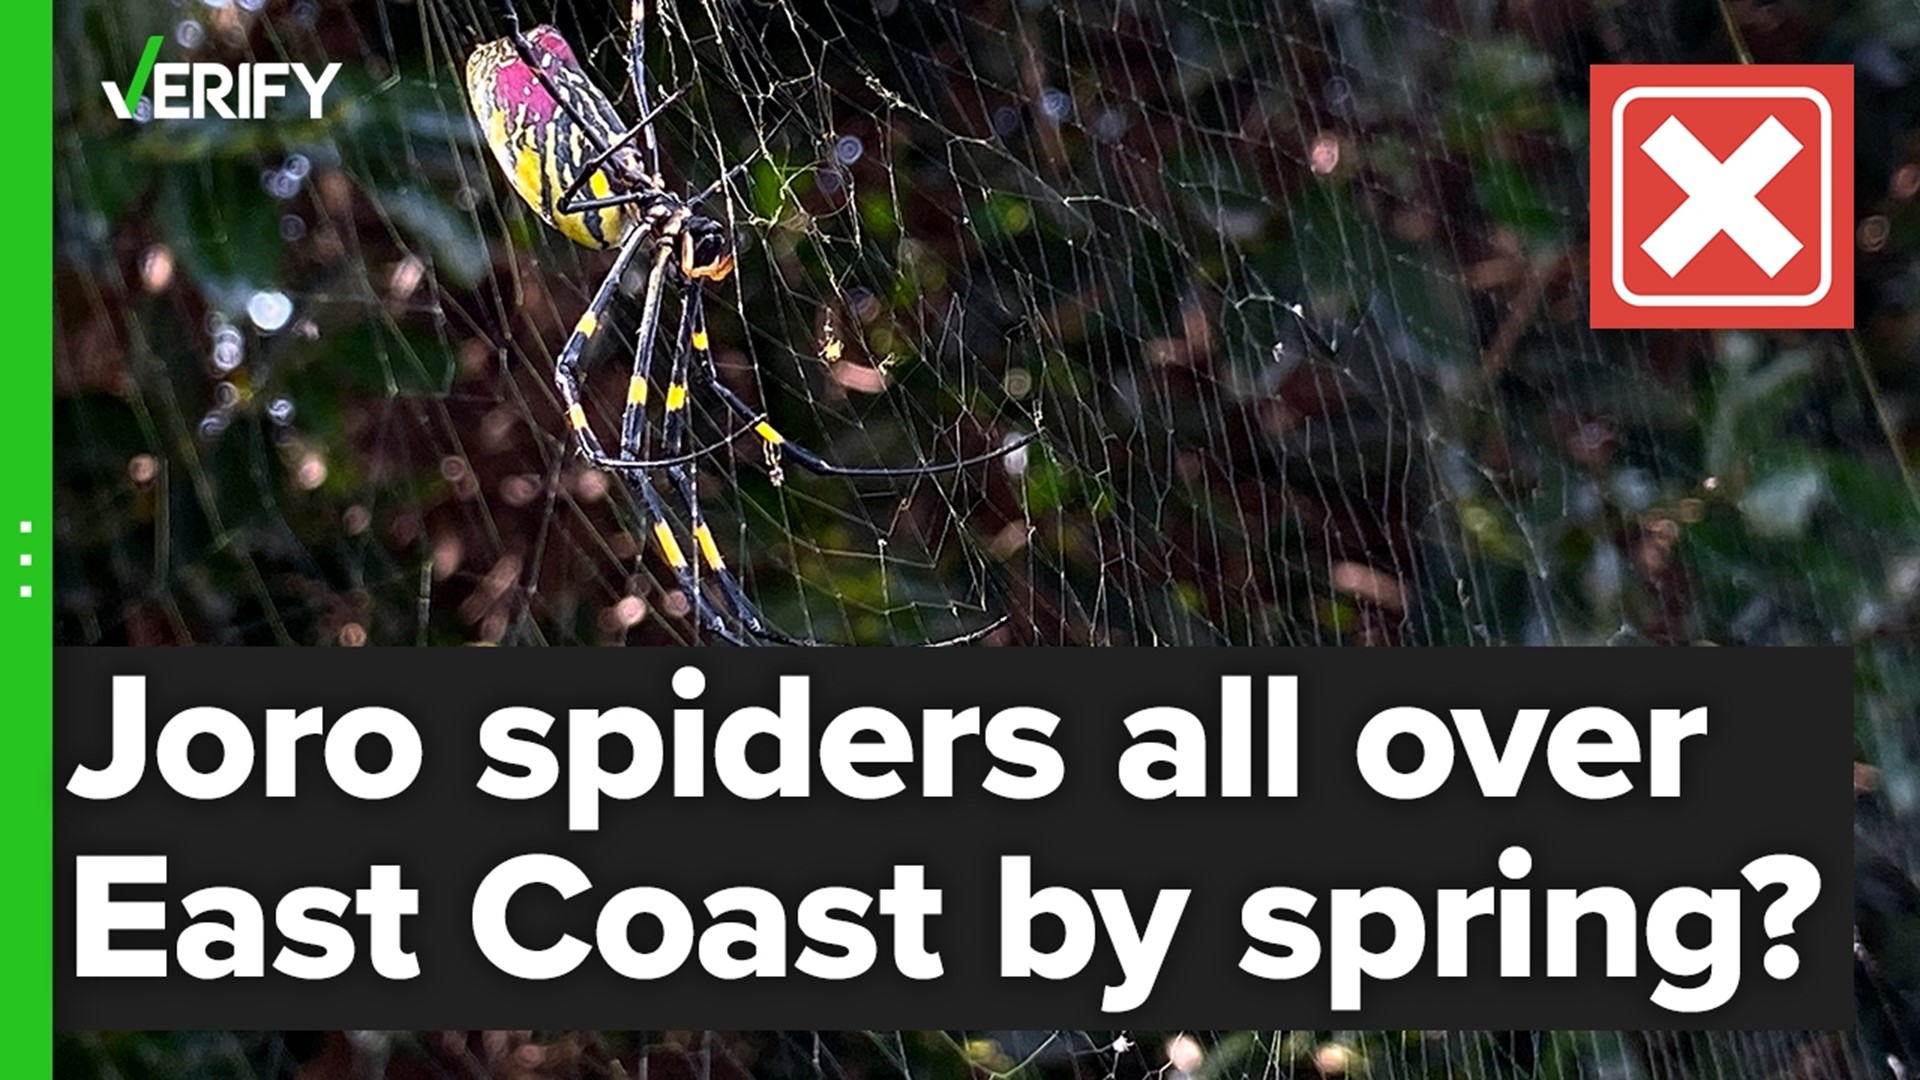 Did a study on Joro spiders say they’ll colonize the entire East Coast by the Spring?  The VERIFY team confirms this is false.